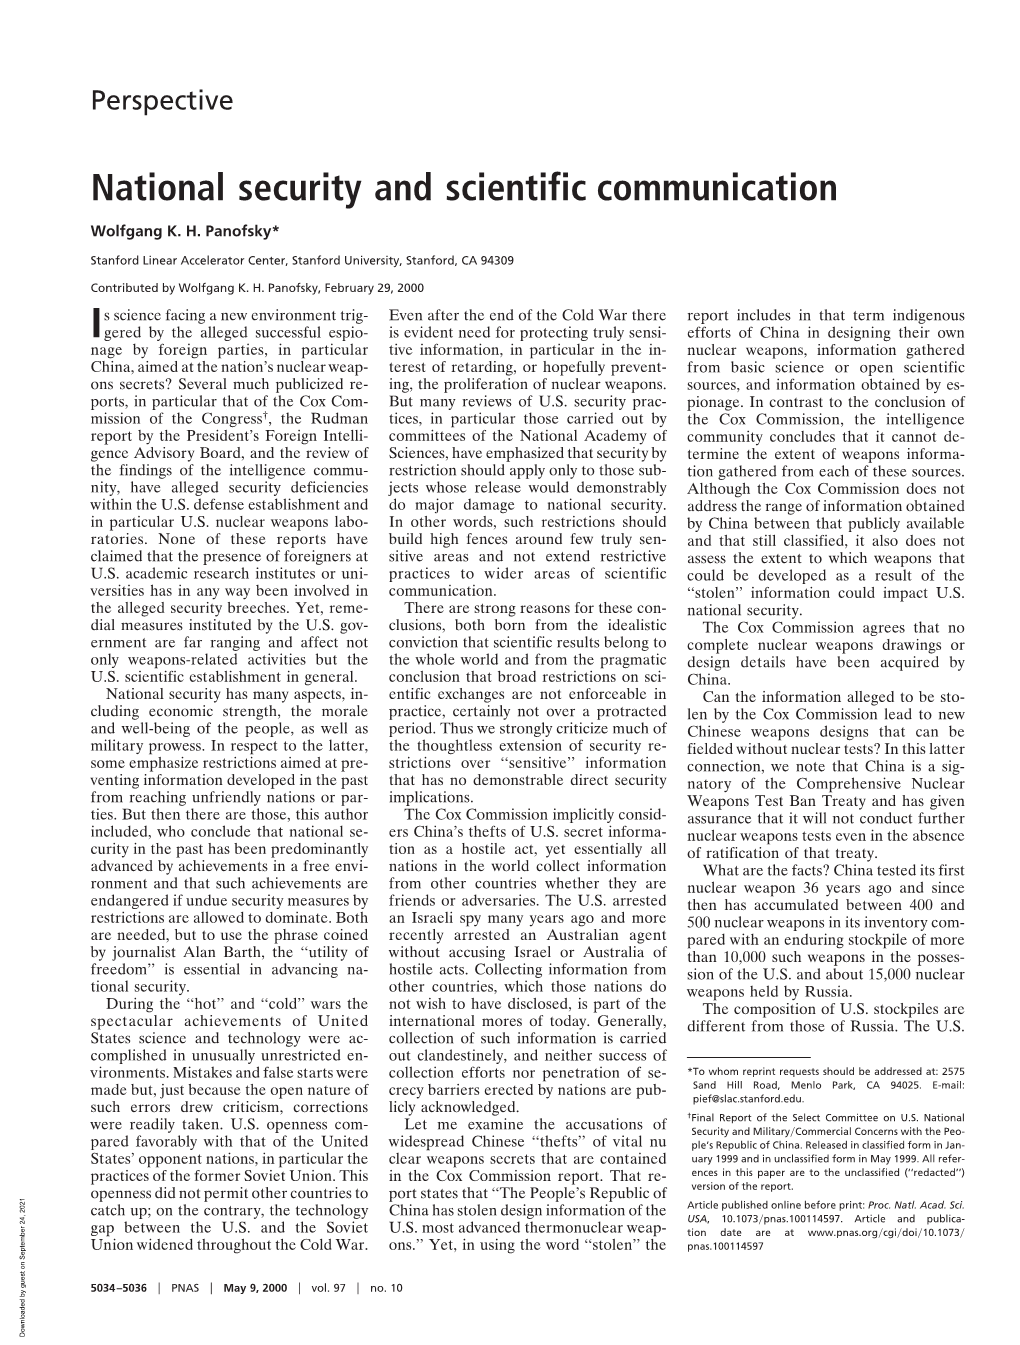 National Security and Scientific Communication